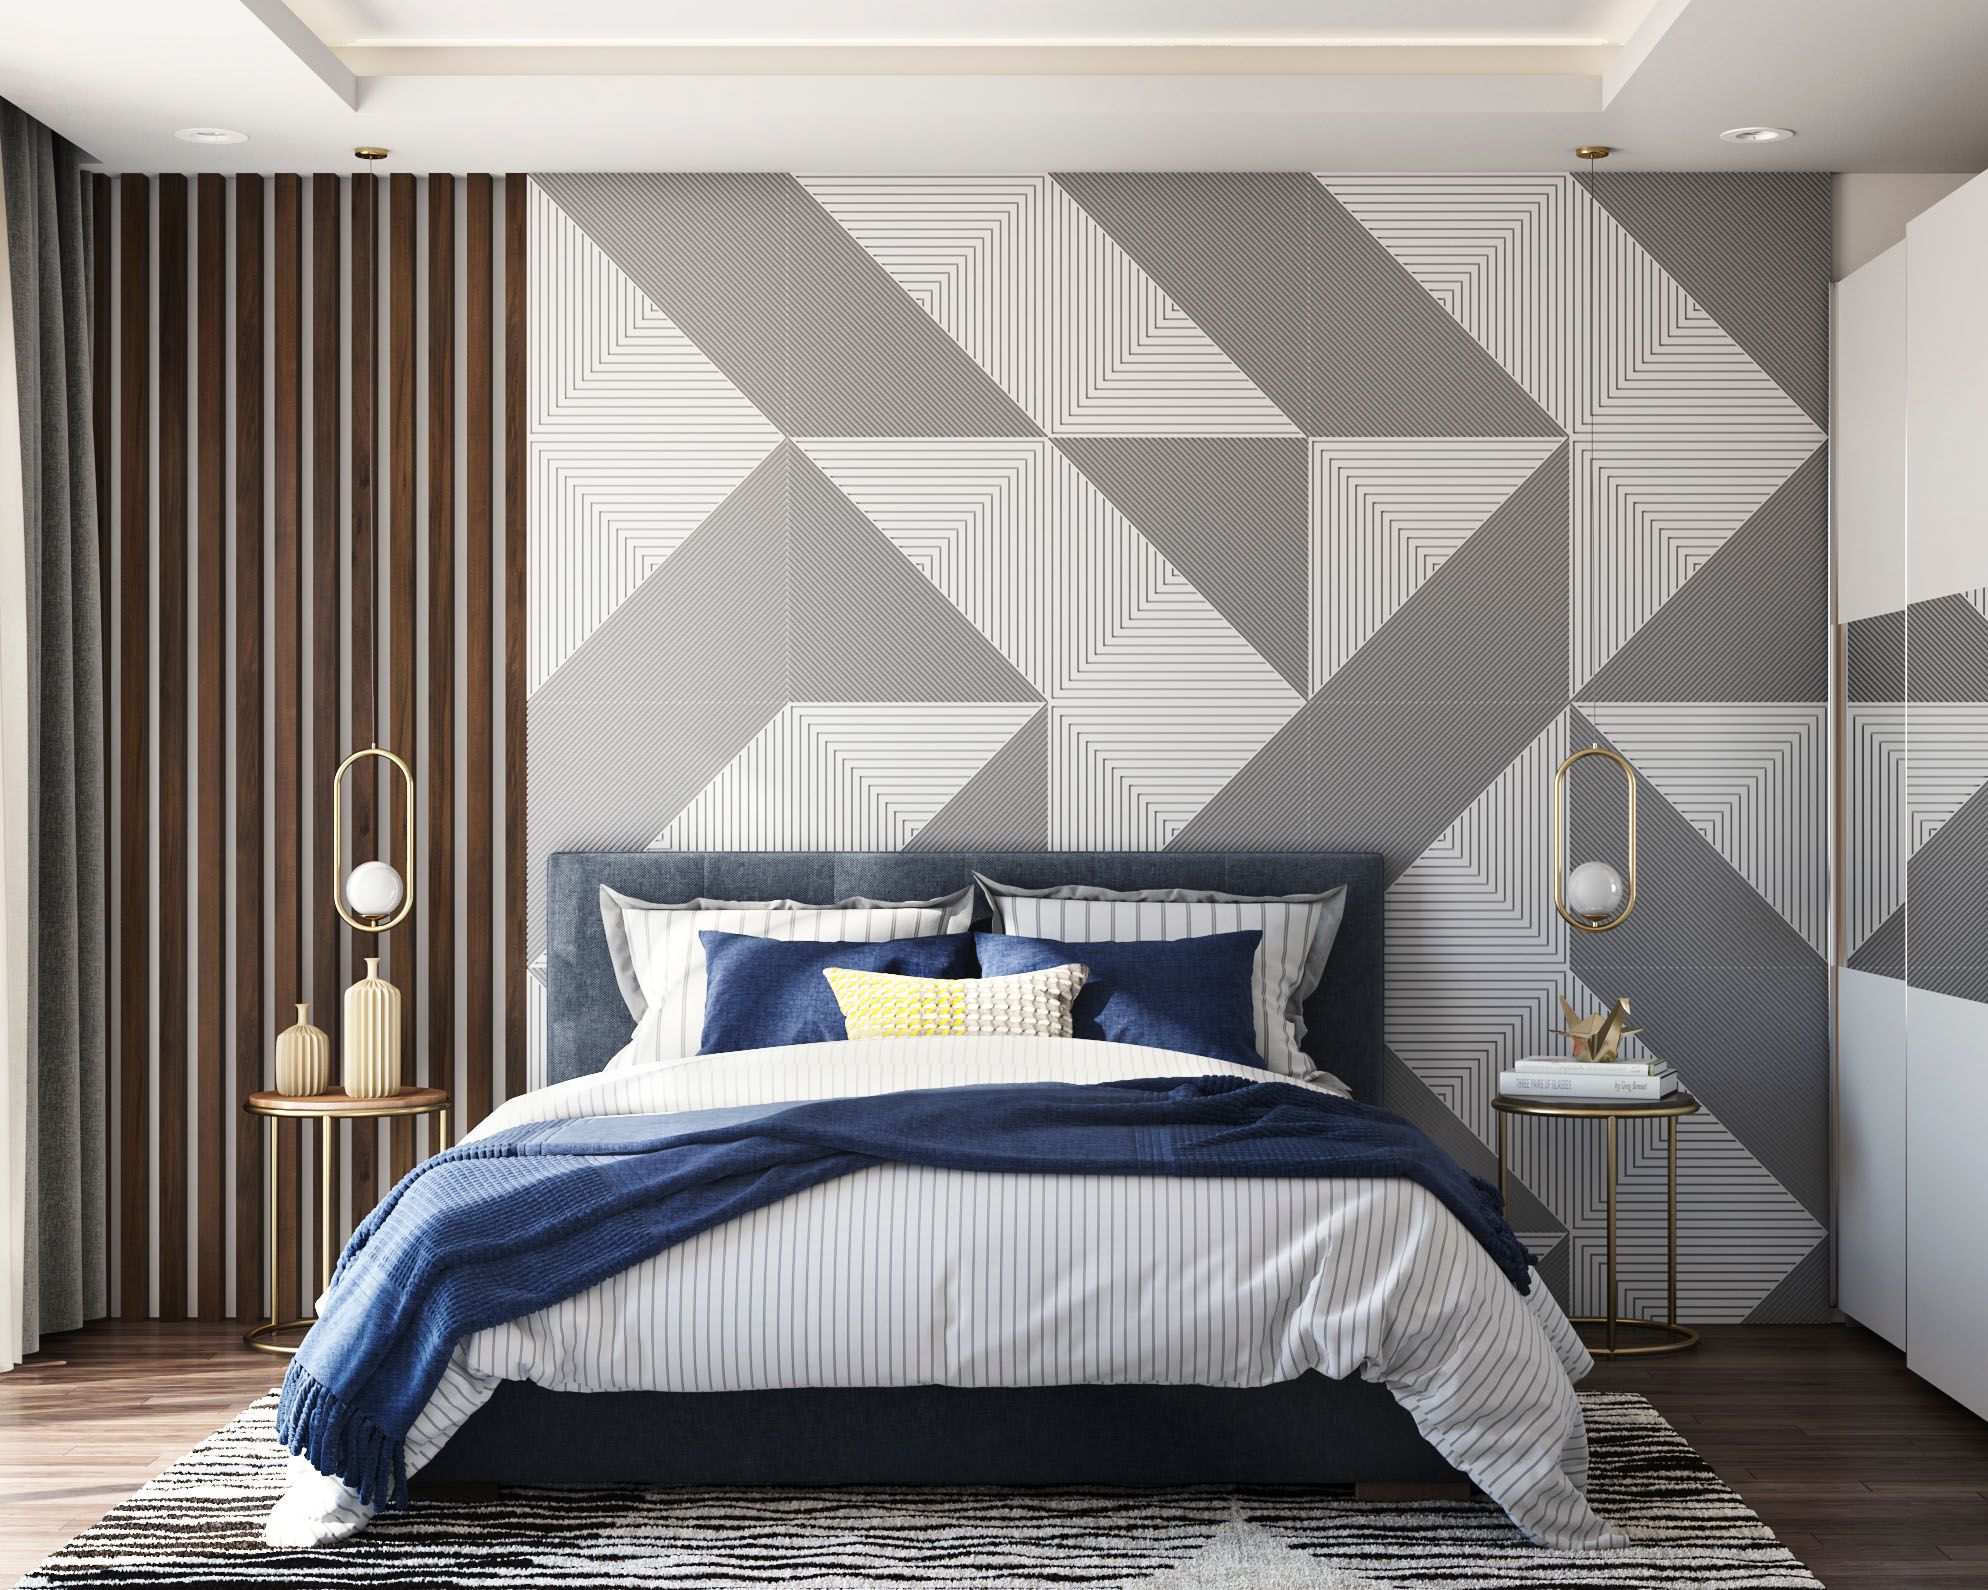 Contemporary Bedroom Wall Design With Geometric Wallpaper And Wall Panelling